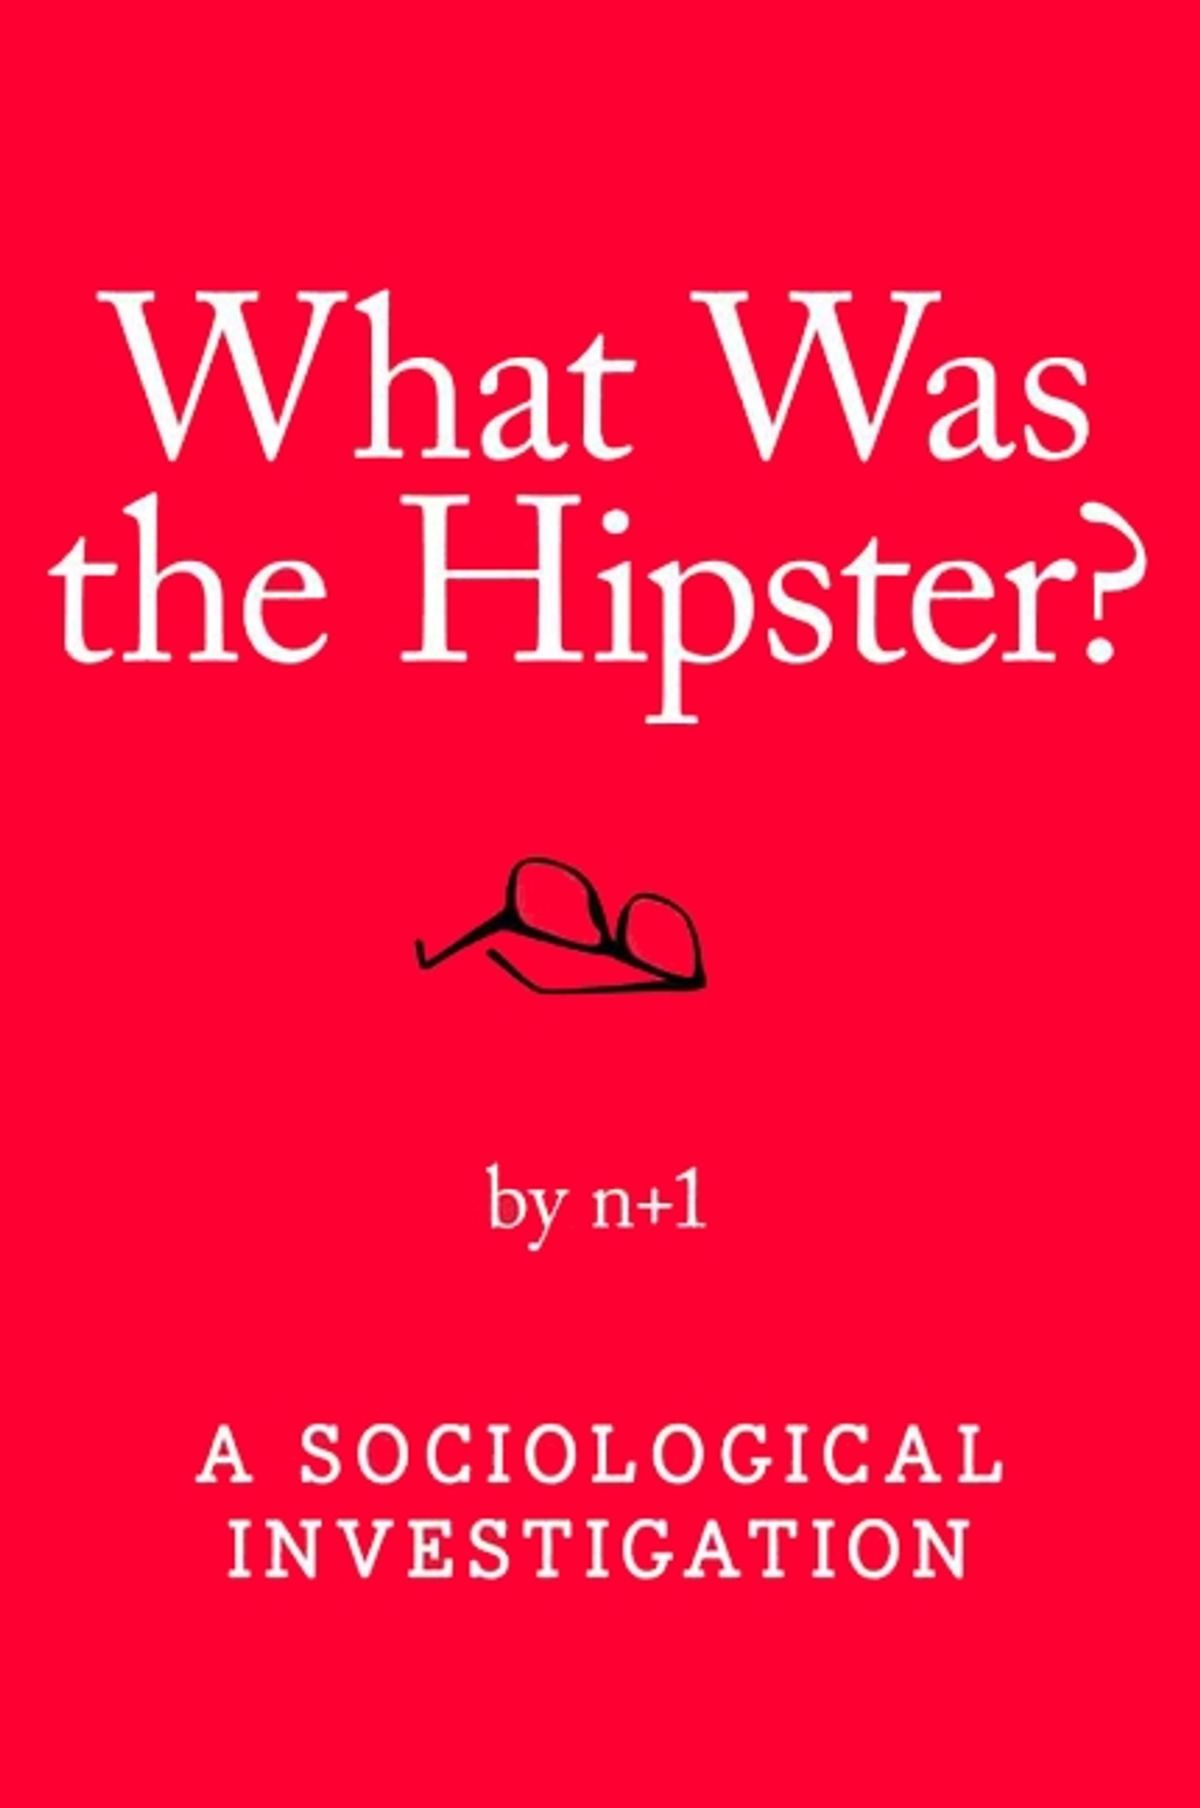 "What Was the Hipster?" by n+1 